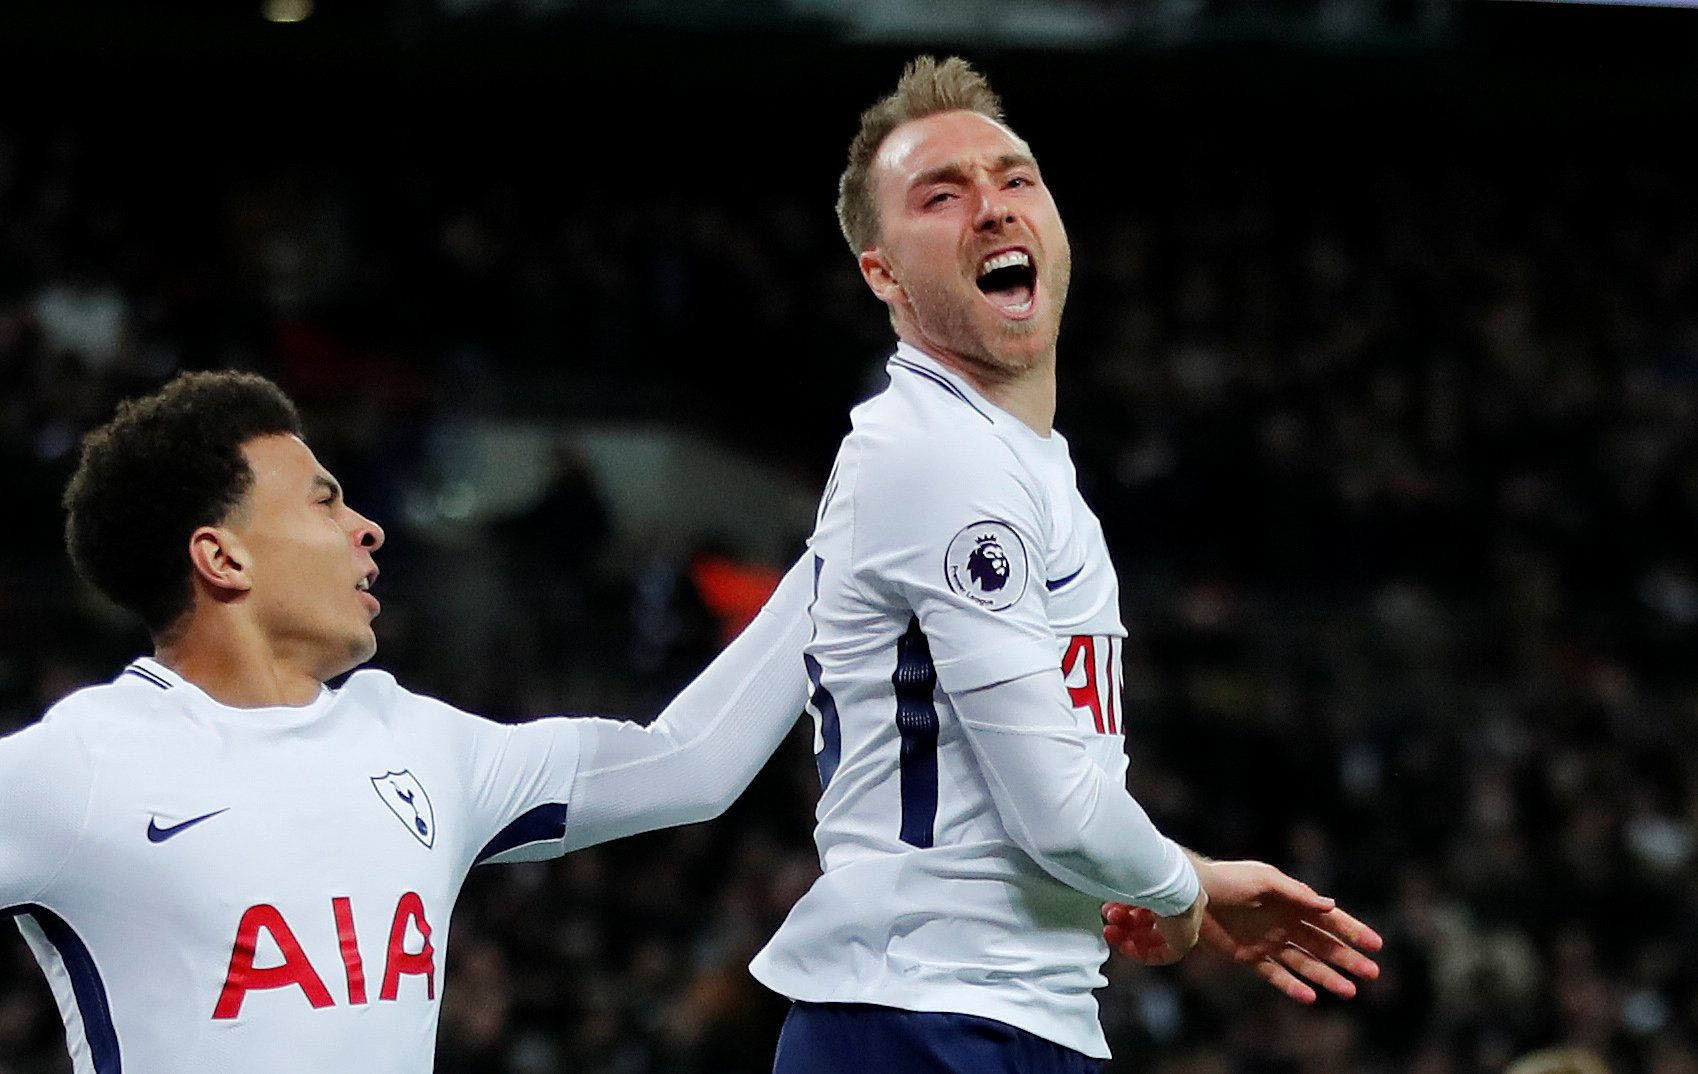 Soccer Football - Premier League - Tottenham Hotspur vs Manchester United - Wembley Stadium, London, Britain - January 31, 2018   Tottenham's Christian Eriksen celebrates with Dele Alli after scoring their first goal     REUTERS/Eddie Keogh    EDITORIAL USE ONLY. No use with unauthorized audio, video, data, fixture lists, club/league logos or 